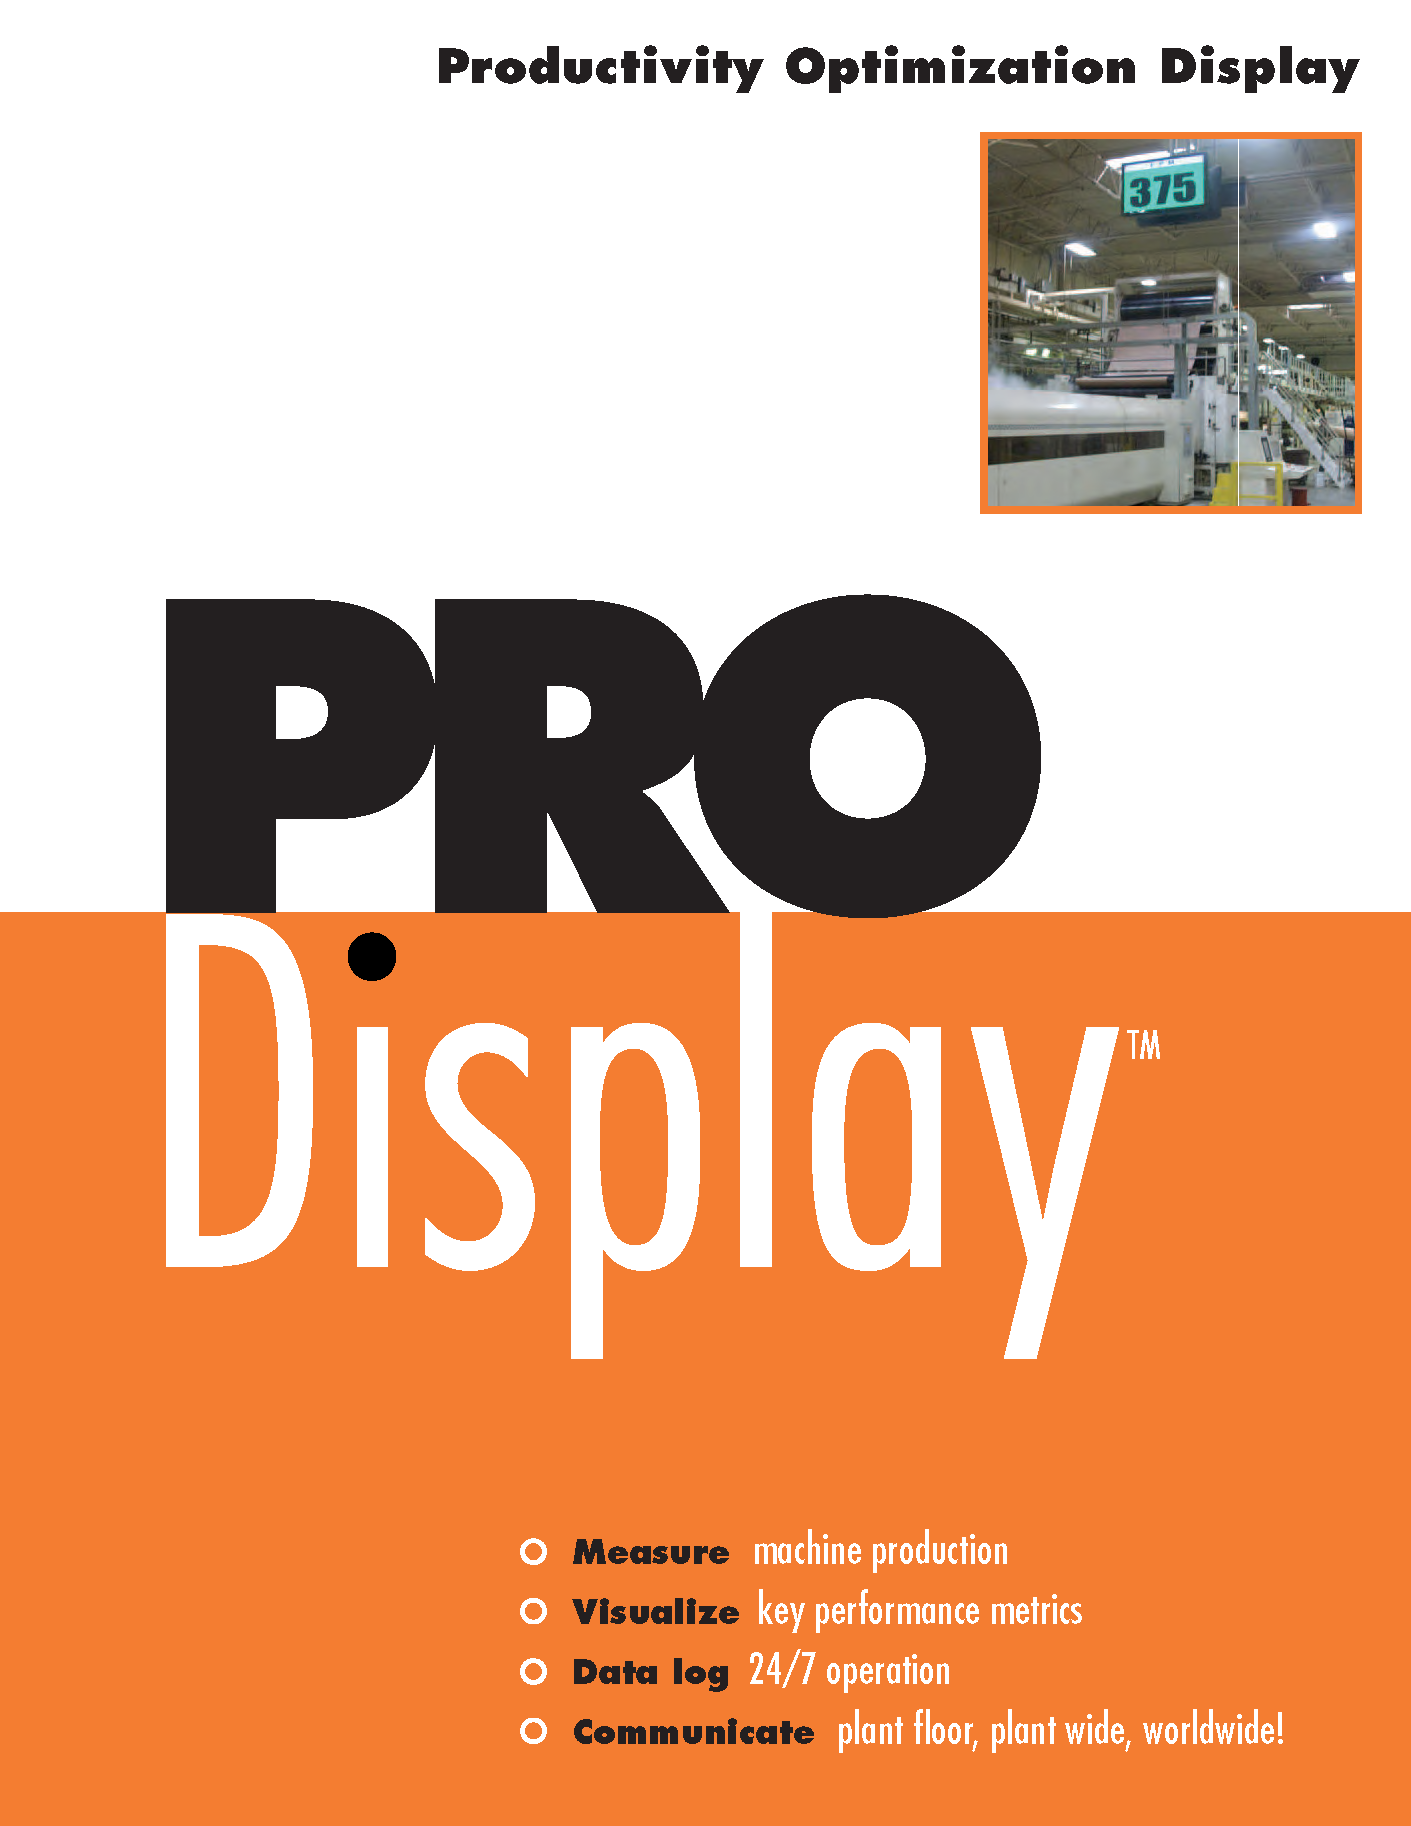 Learn more about the Productivity Optimization Display by Chicago Electric in their brochure. 